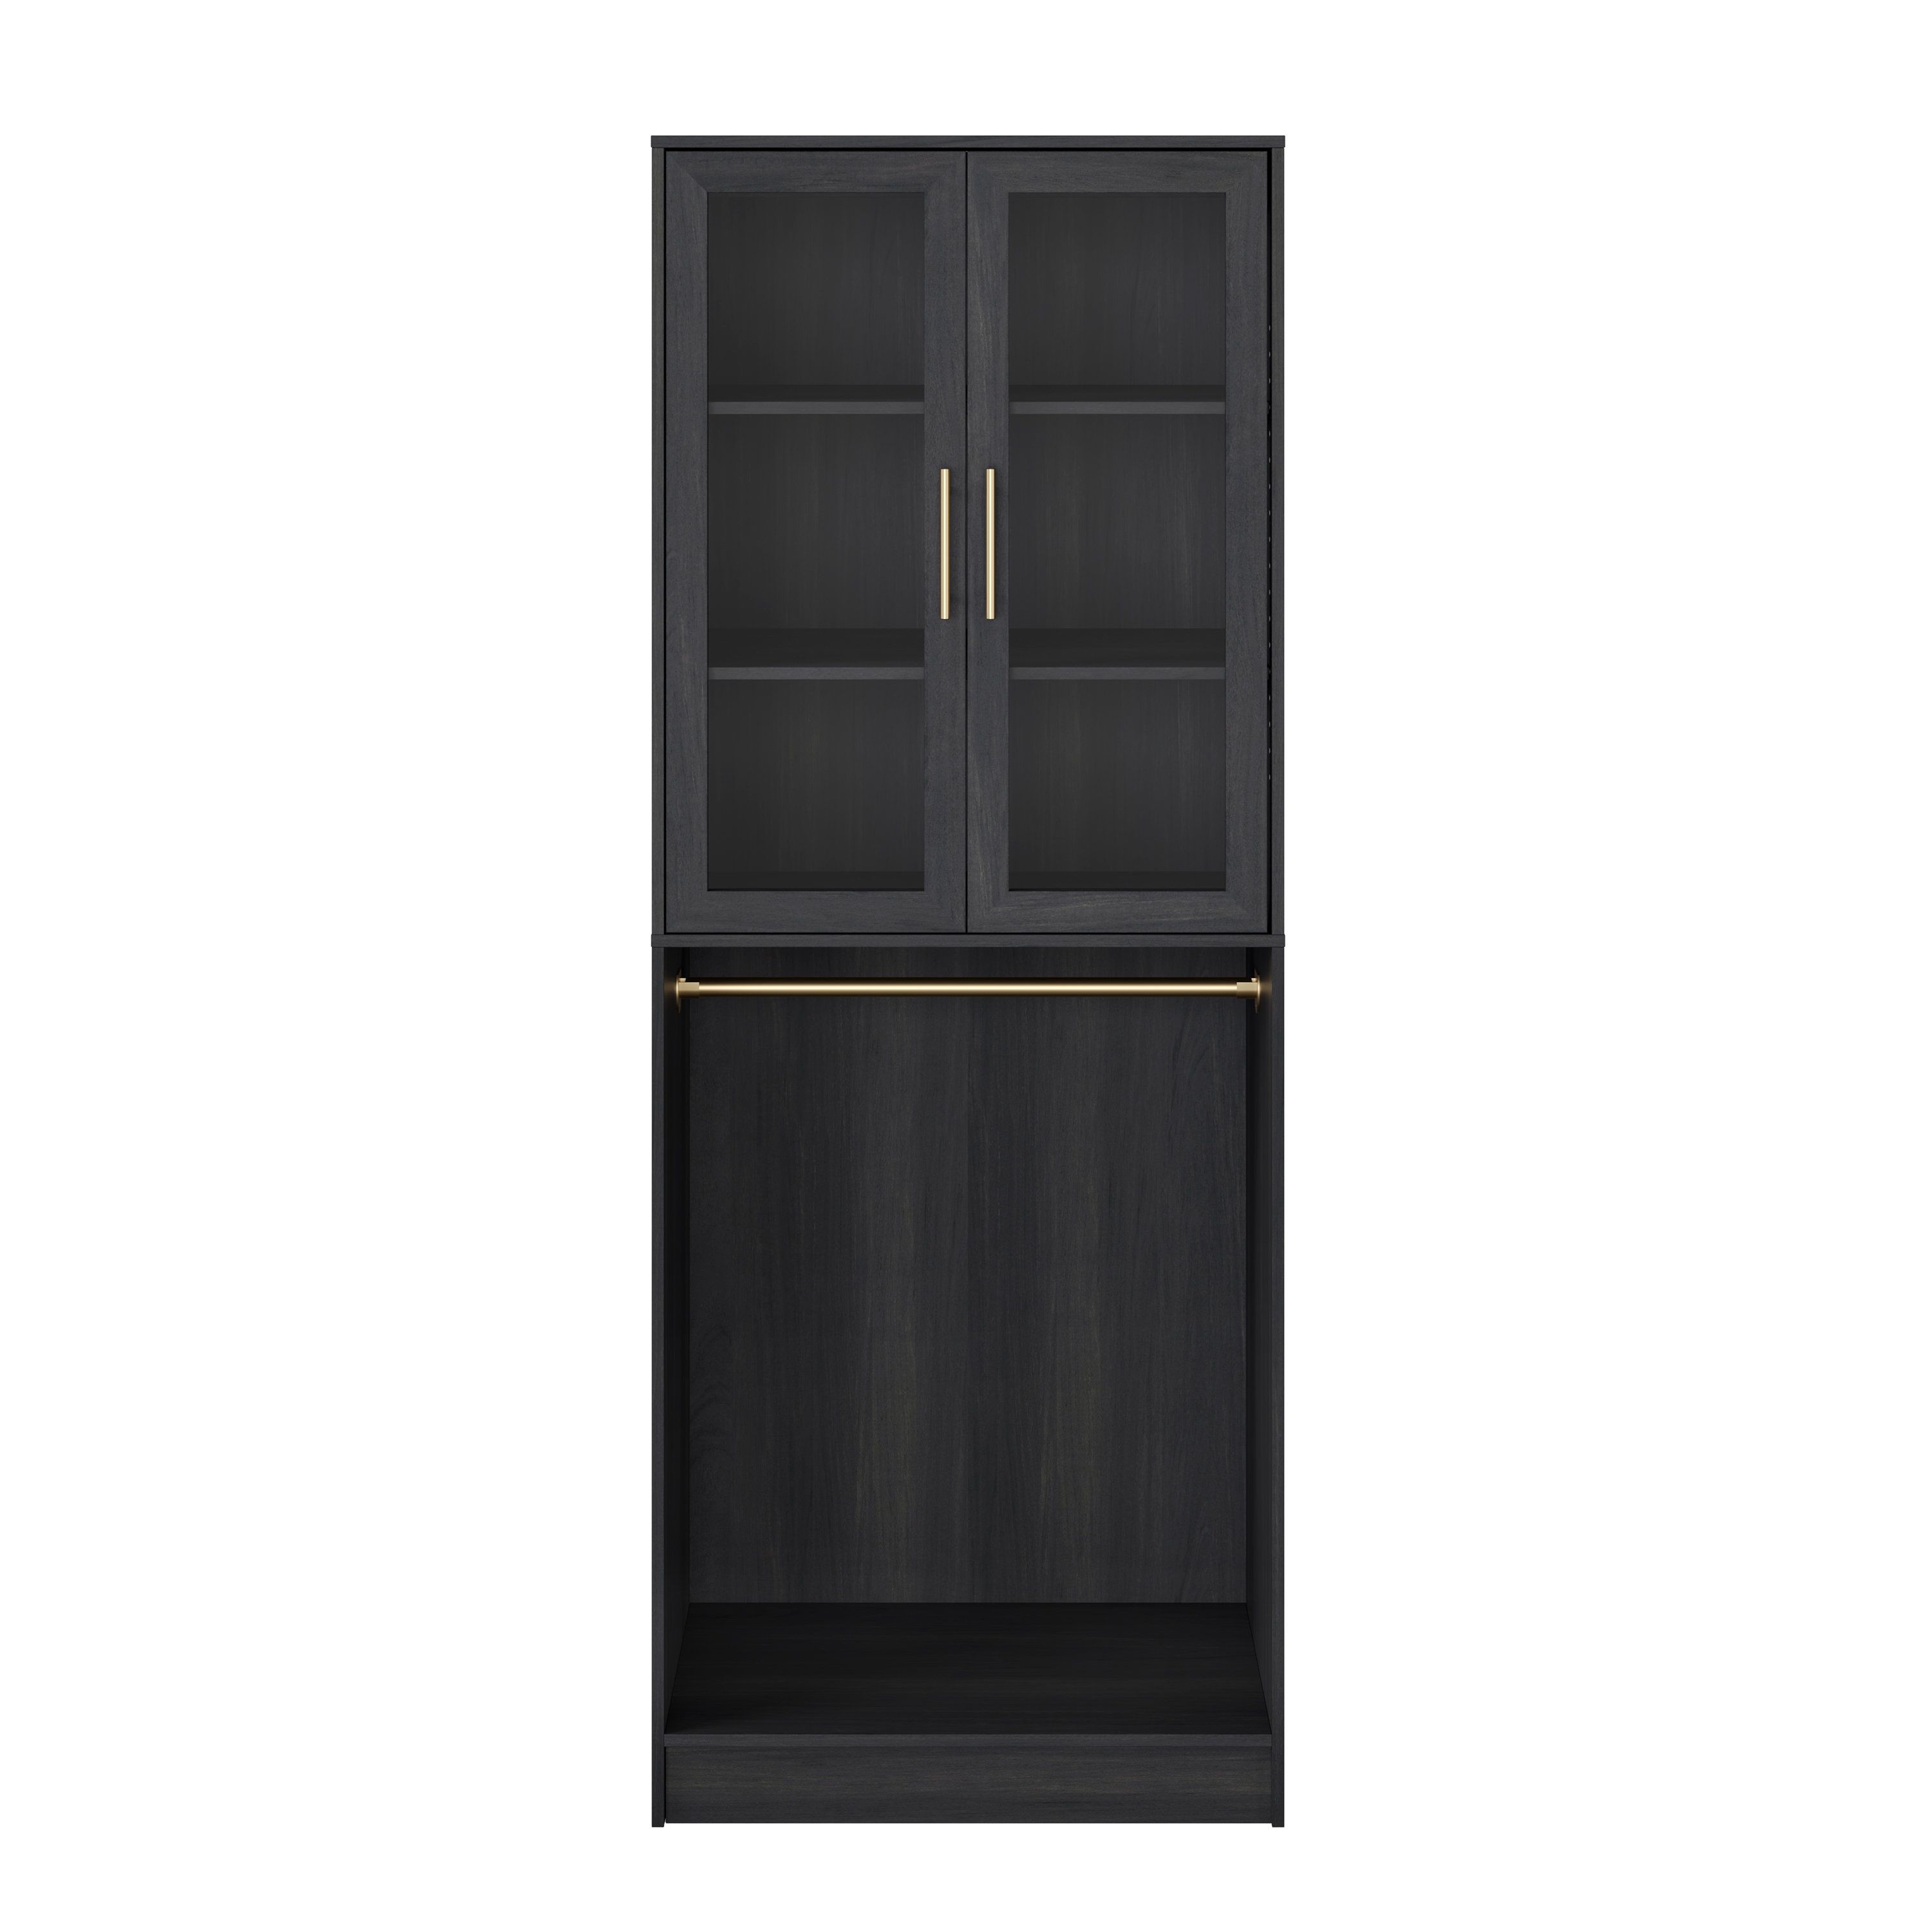 Scott Living Robin 30" Wardrobe Closet With 2 Door Cabinet With 2 Shelves  And Clothes Rod Closet System | Wayfair Inside 2 Separable Wardrobes (View 11 of 15)